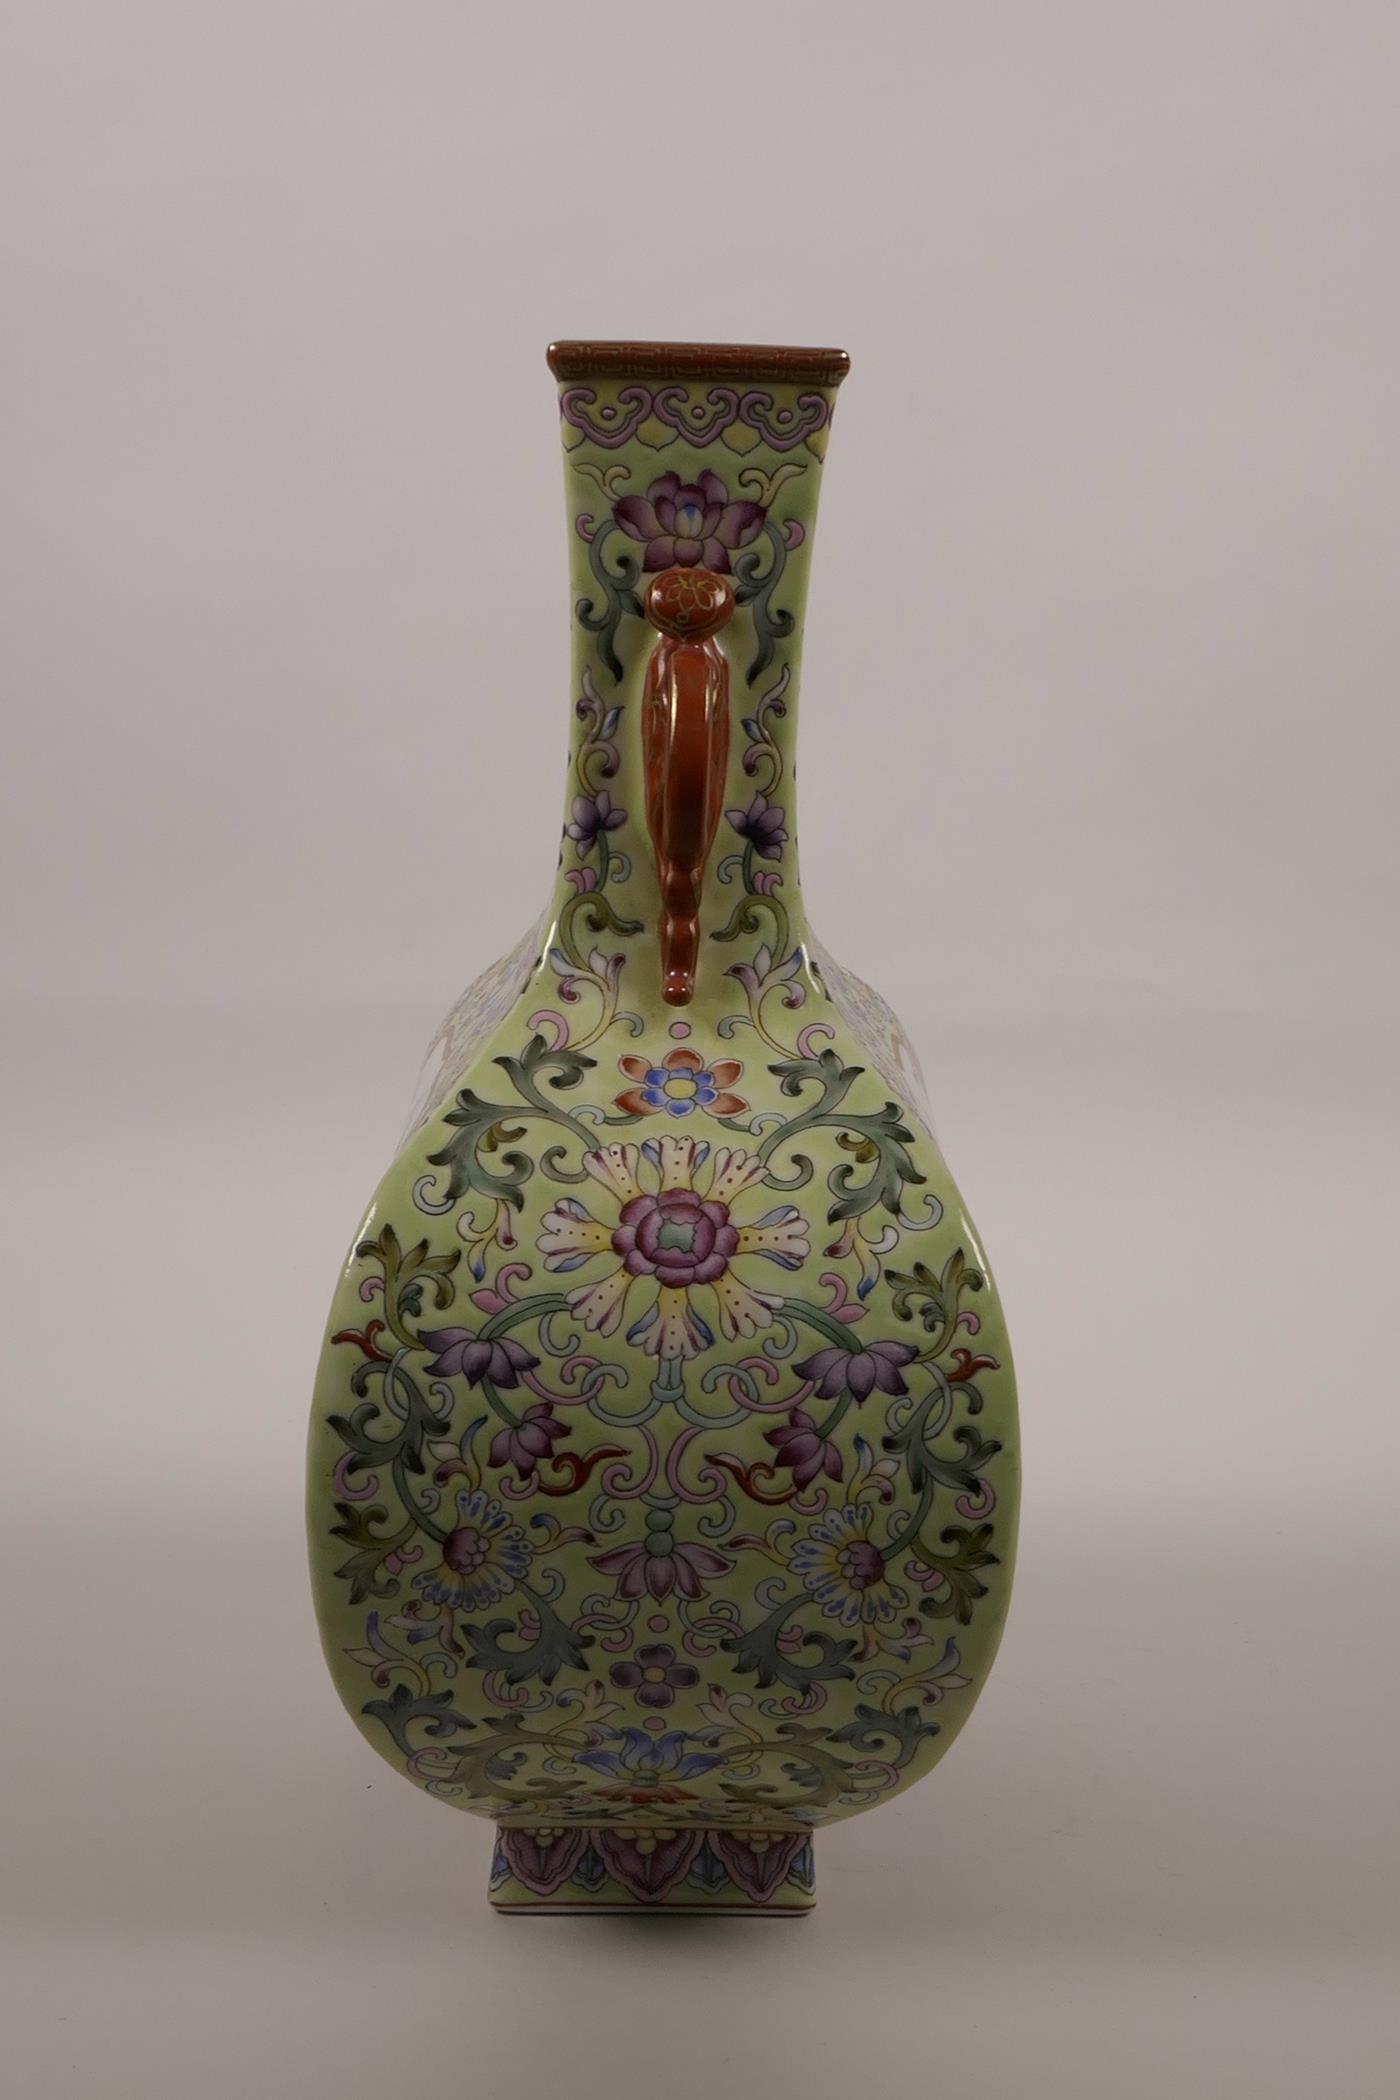 A Chinese polychrome enamelled porcelain vase with two bat shaped handles and decorative panels - Image 4 of 5